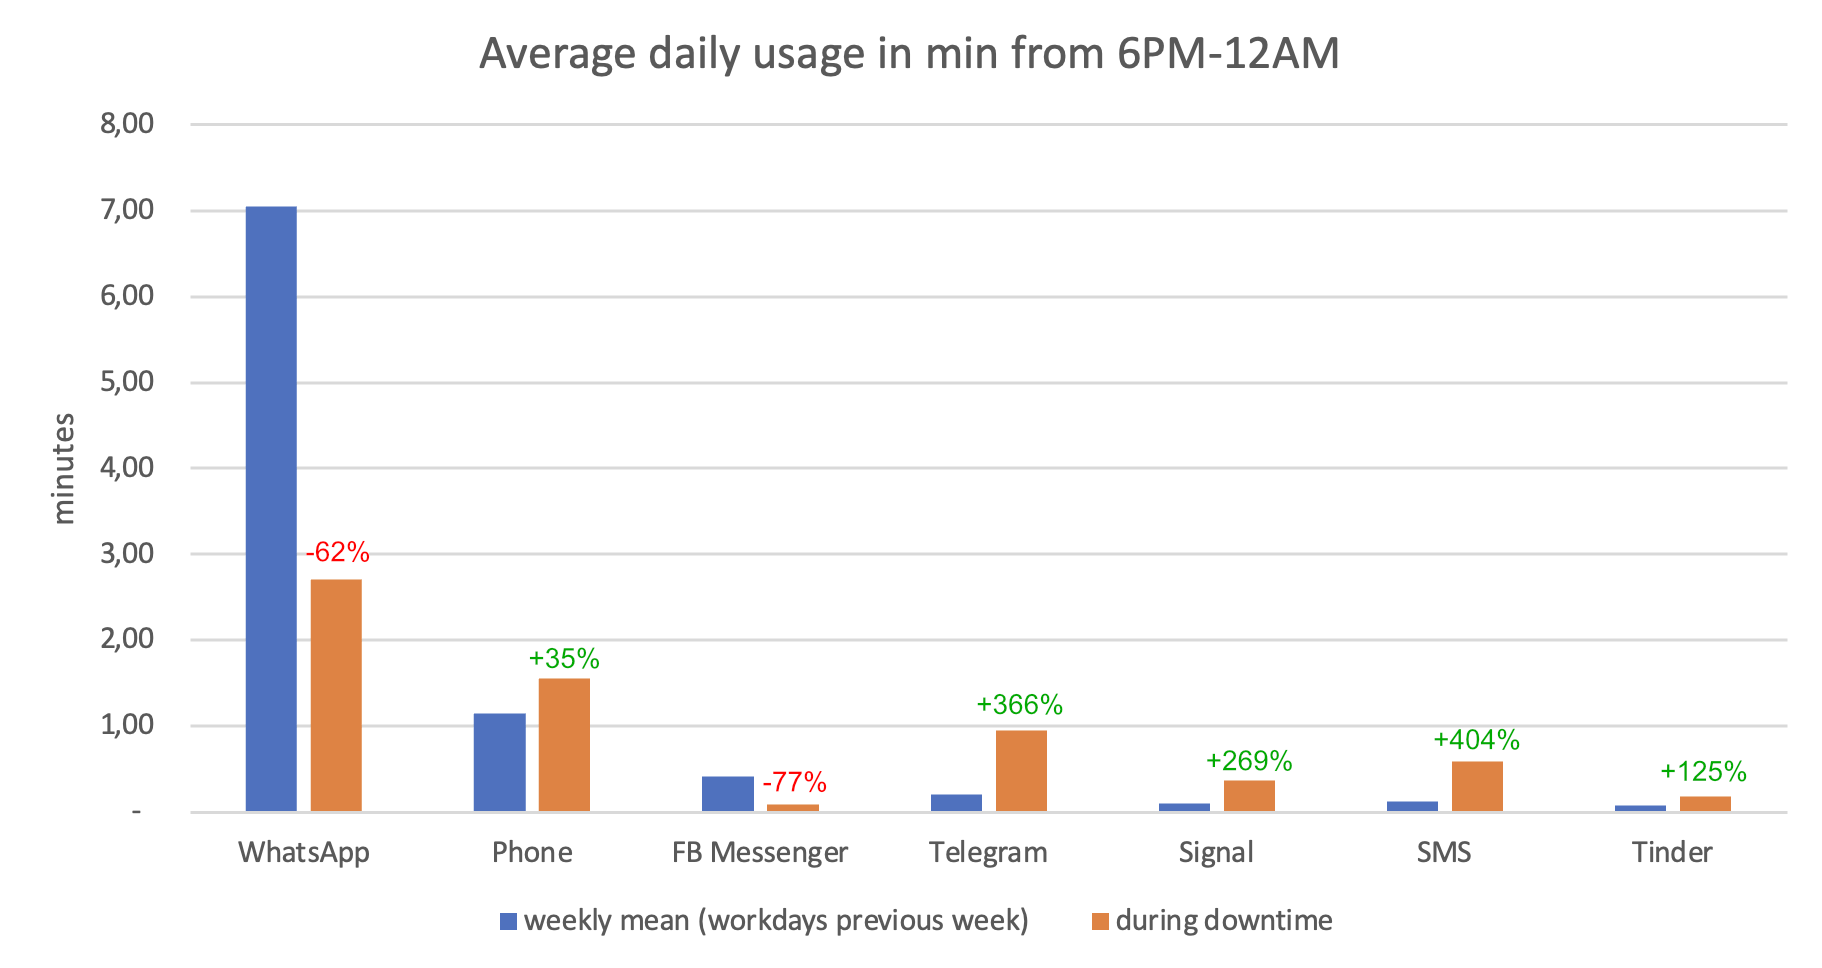 Average daily usage of messaging apps in minutes from 6PM - 12AM